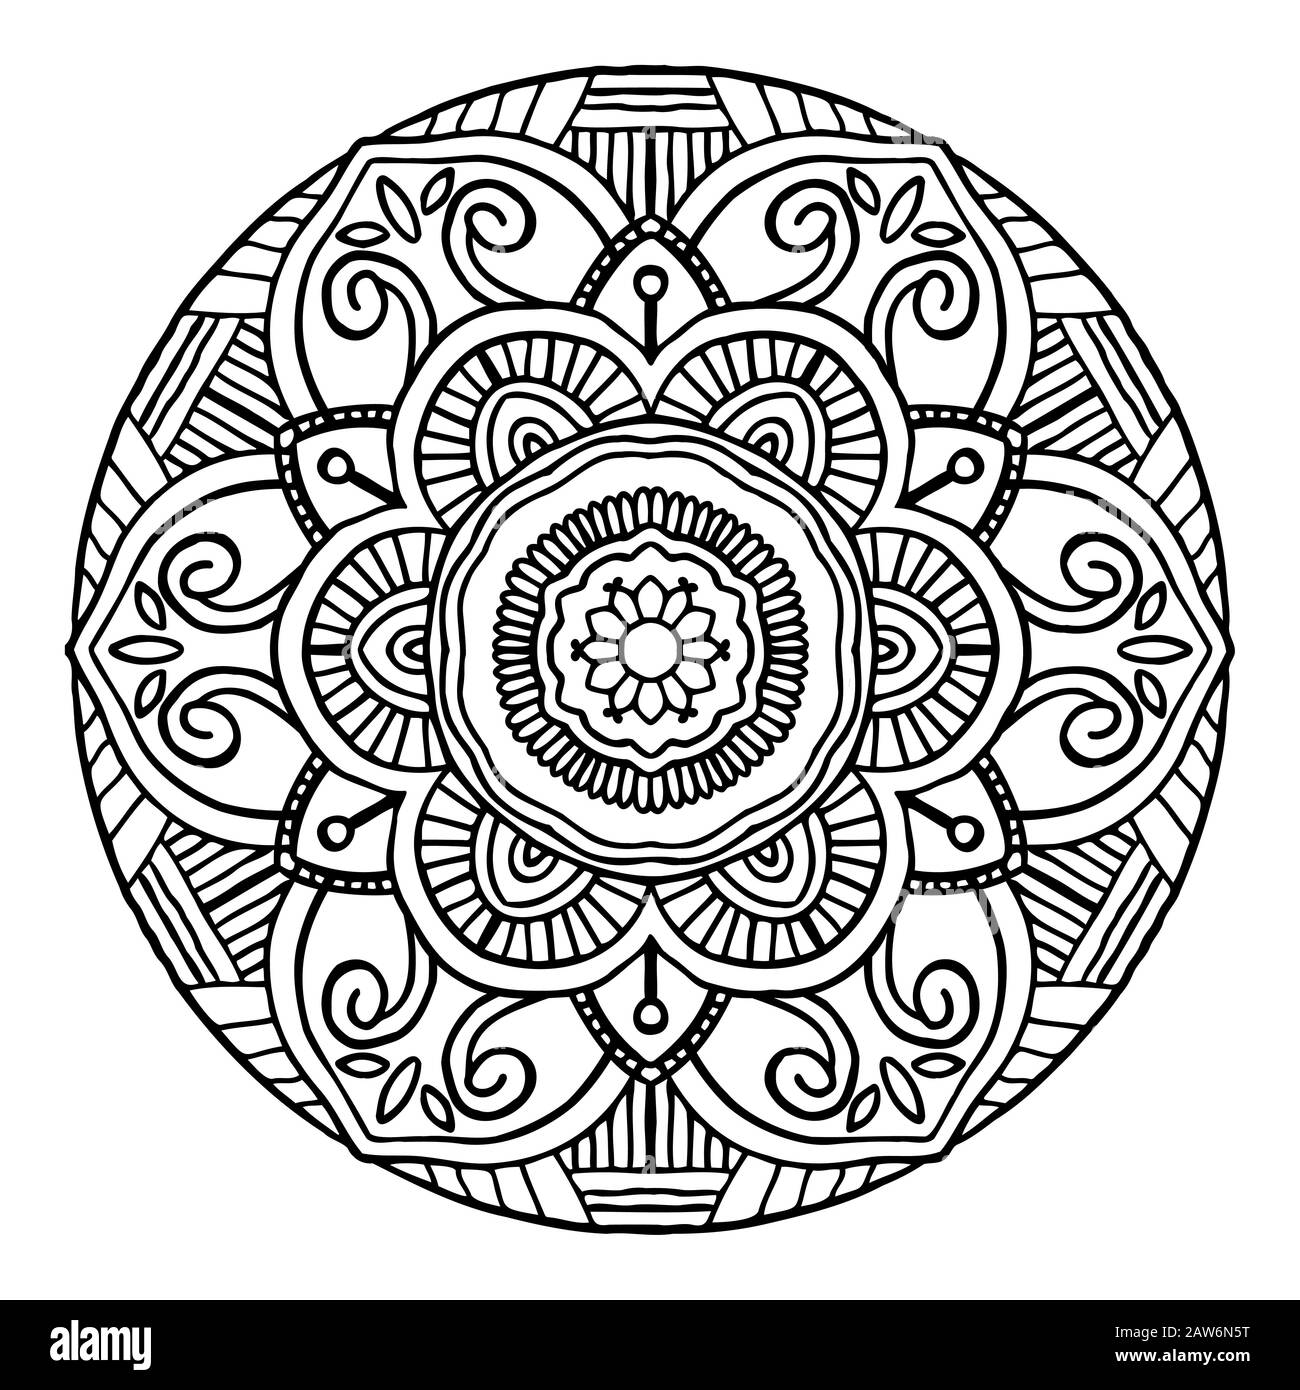 Outline Mandala decorative round ornament, can be used for coloring book, anti-stress therapy, greeting card, phone case print, etc. Hand drawn style Stock Vector